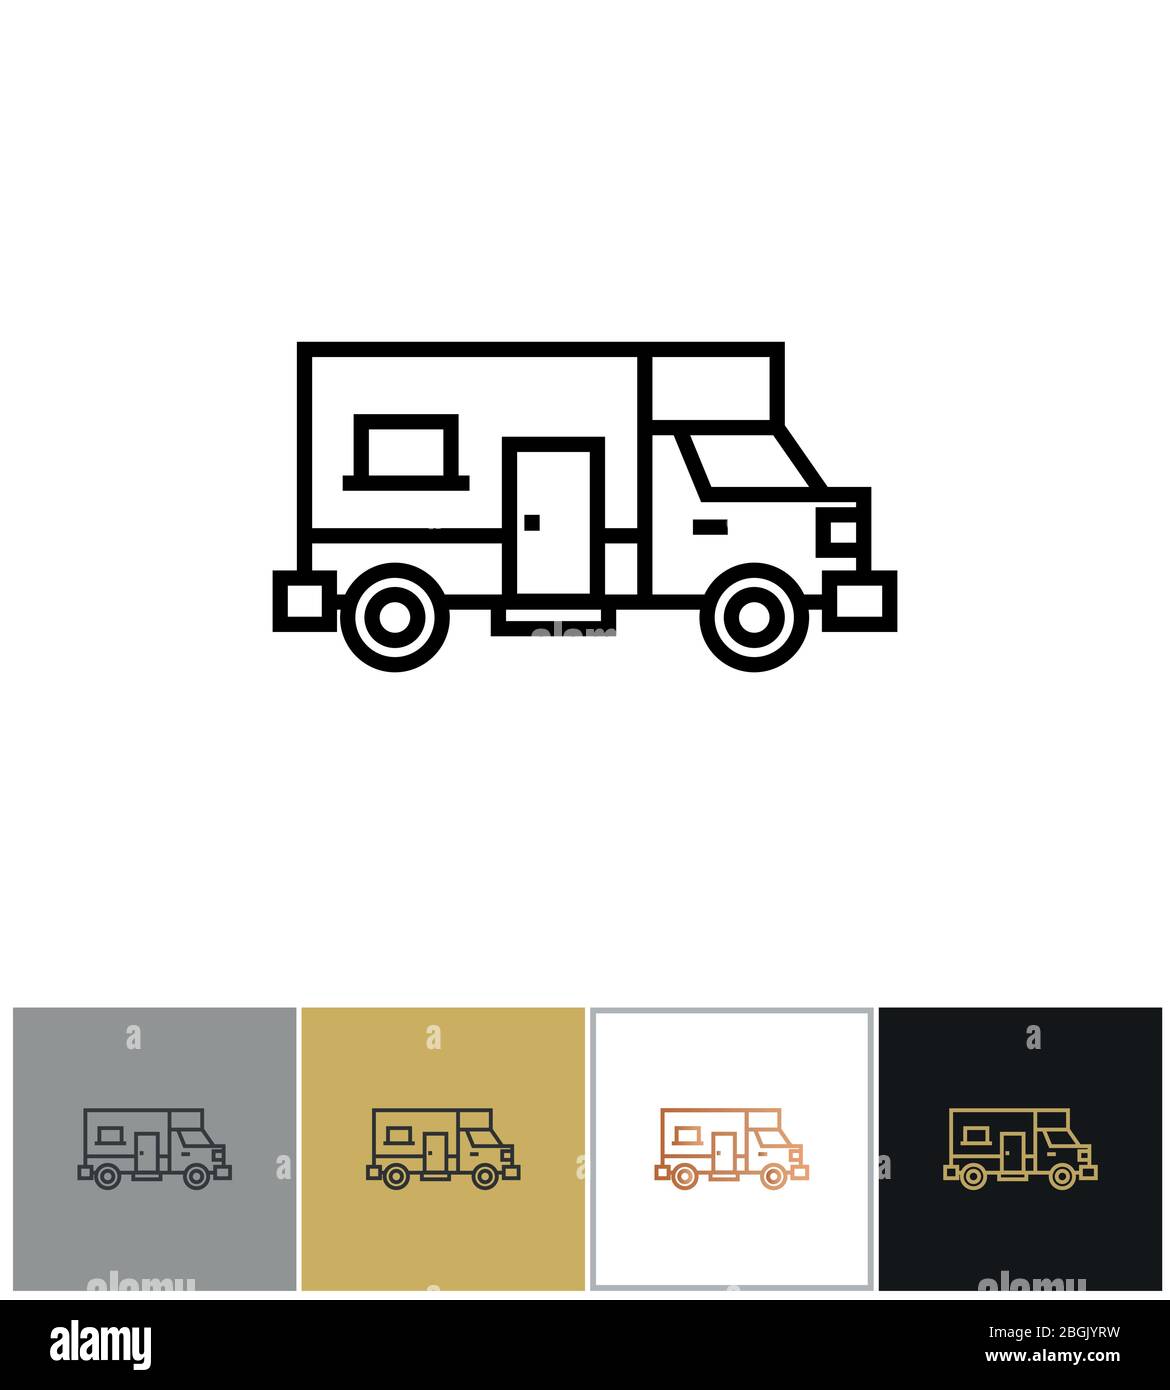 Recreational vehicle icon, motor home camper sign, family caravan vacation trailer symbol on white and black backgrounds. Vector illustration Stock Vector